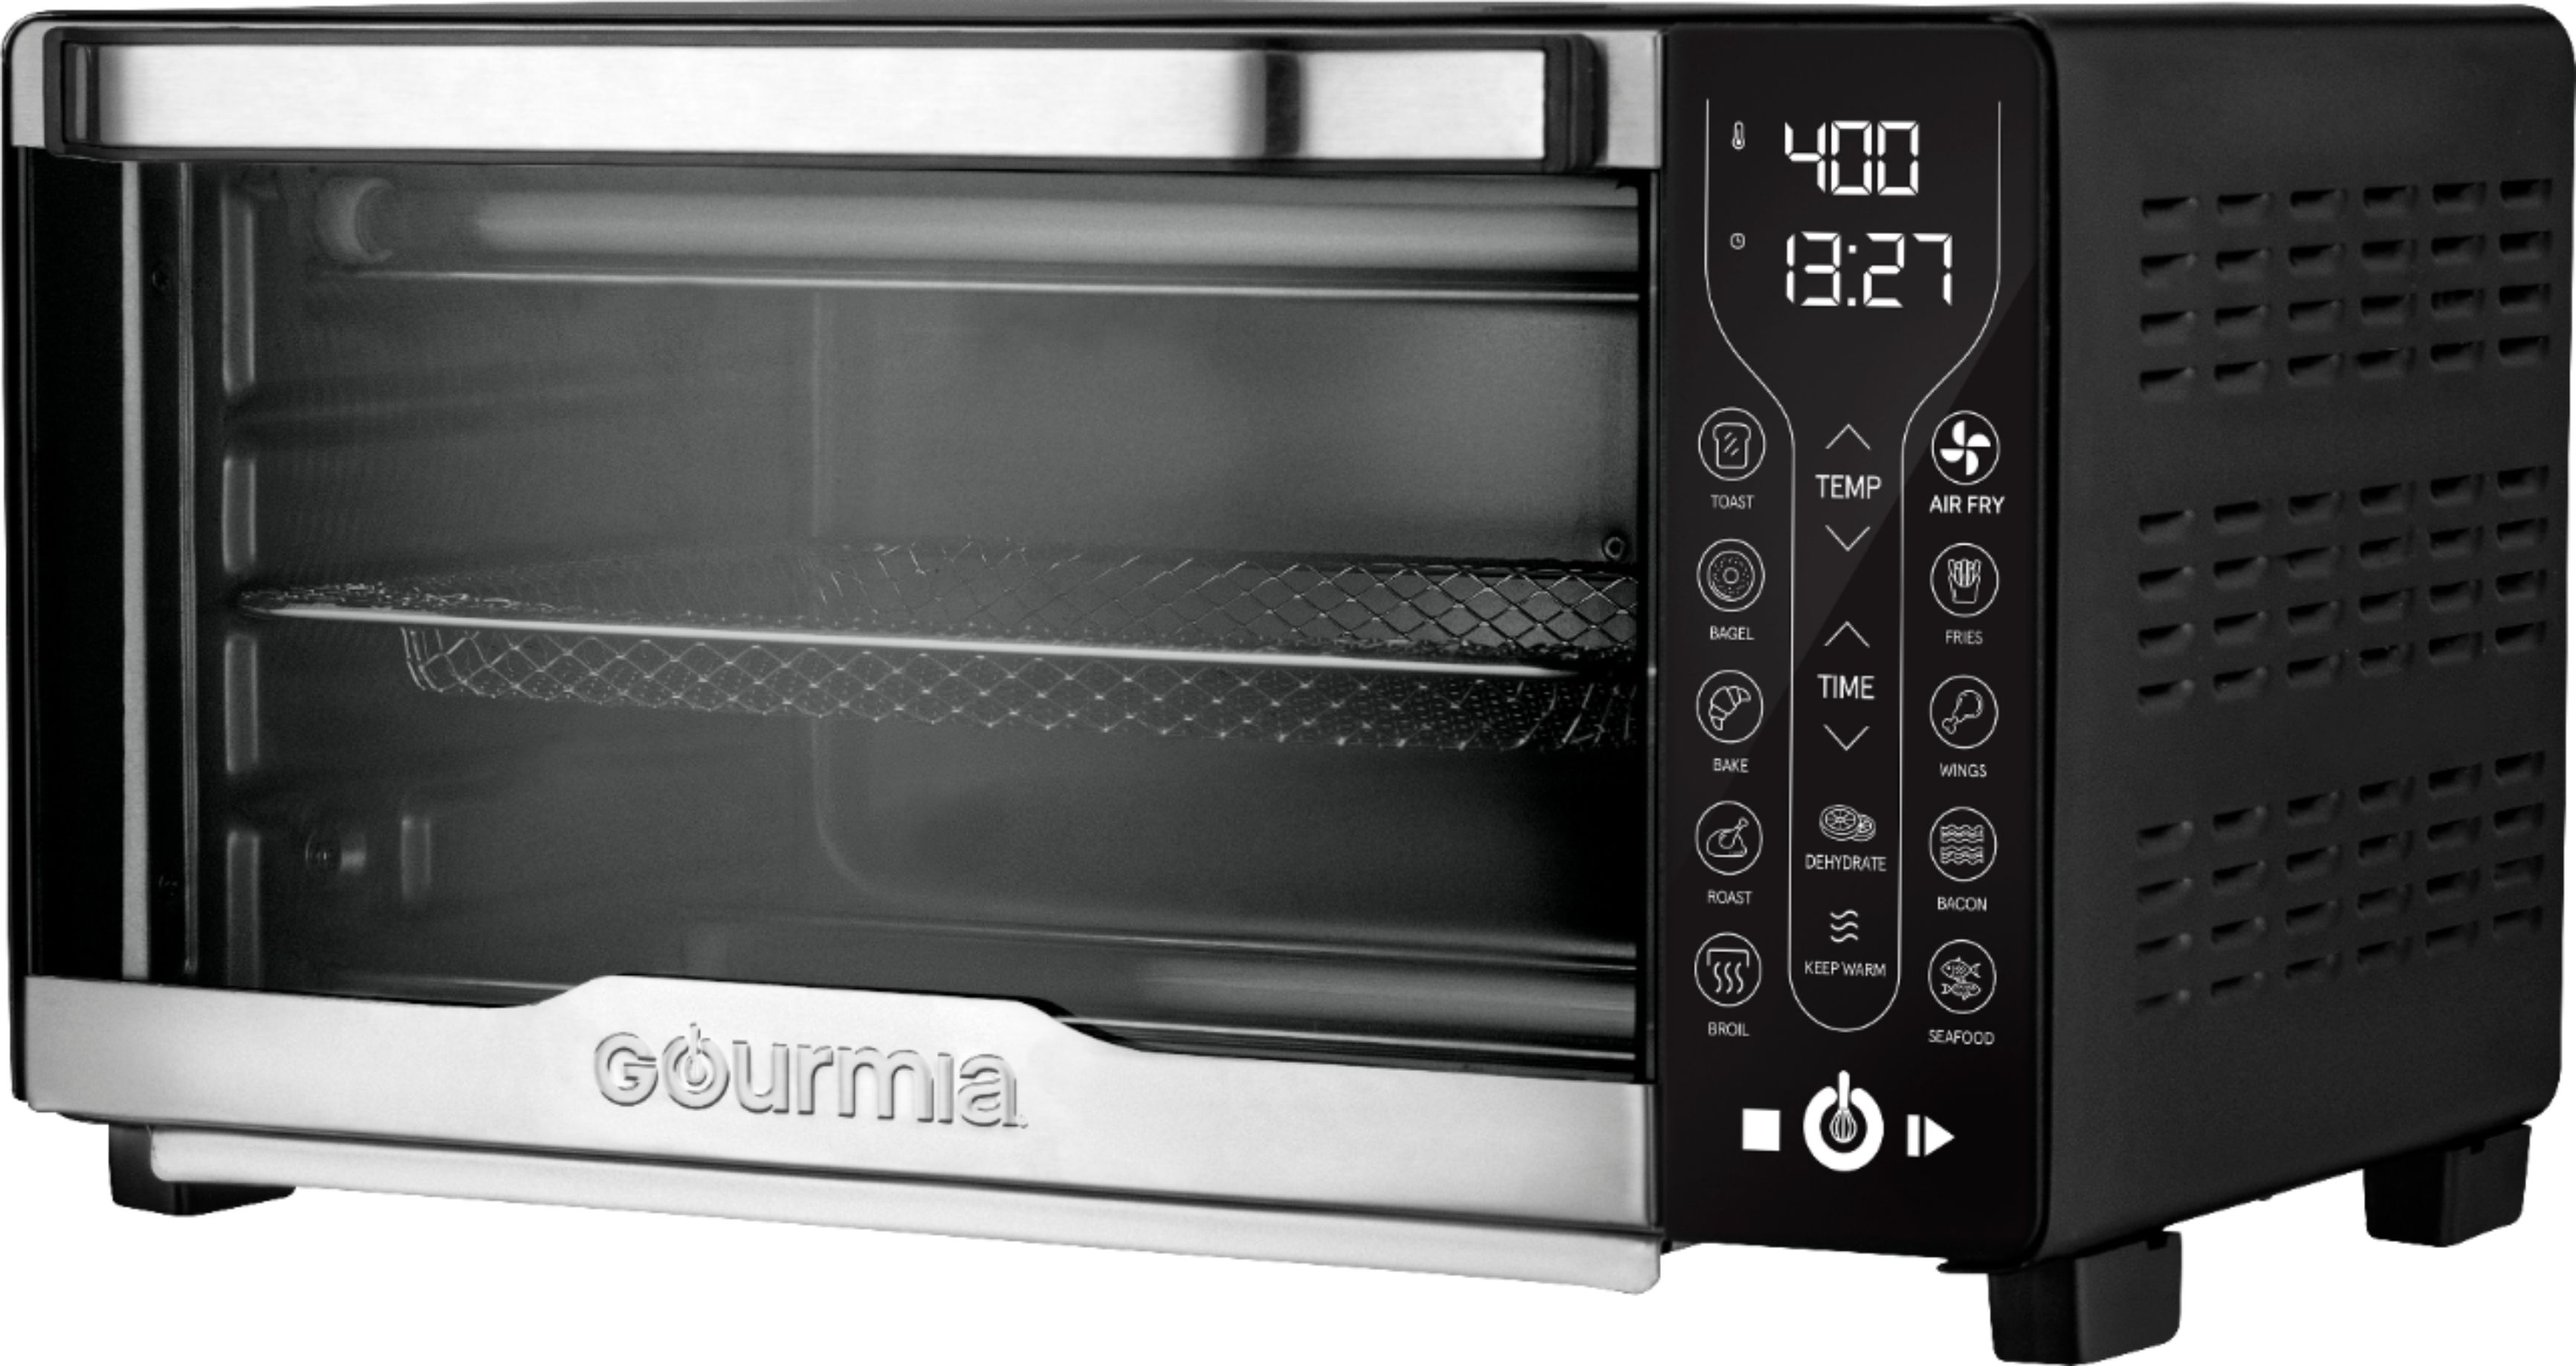 Gourmia Stainless Steel Toaster Oven Air Fryer, 1 ct - Dillons Food Stores